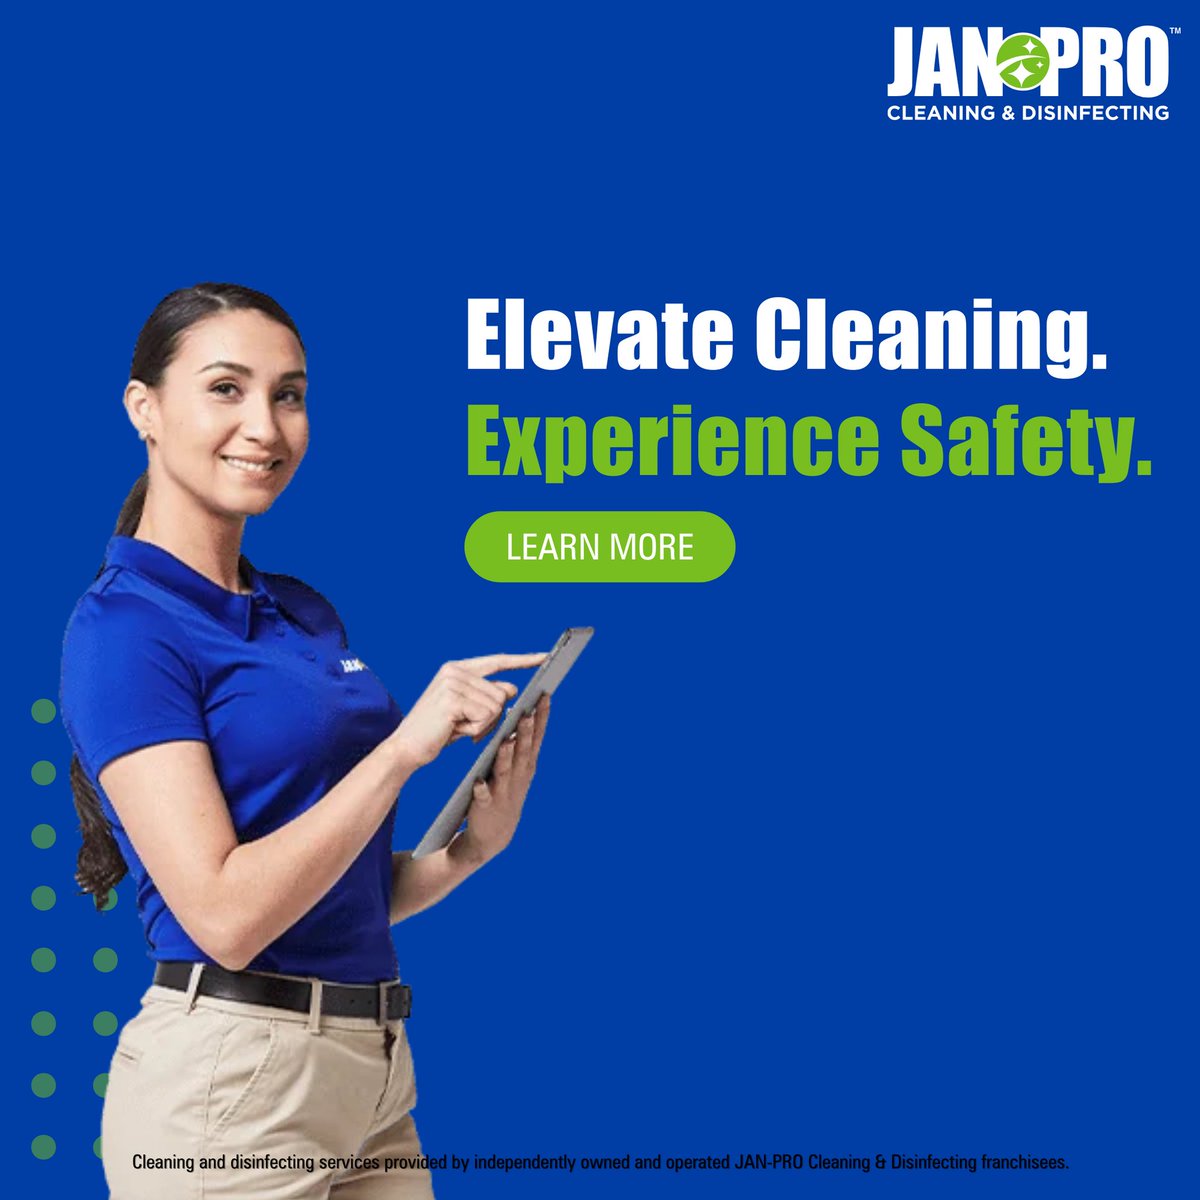 Experience a higher standard of safety and excellence in cleaning with JAN-PRO Cleaning and Disinfecting services.

#commercialcleaning #janitorialservices #businesscleaning #northeastwisconsin  #janpro #janproinNortheastWisconsin #business #EnviroShield #GreenCleaning